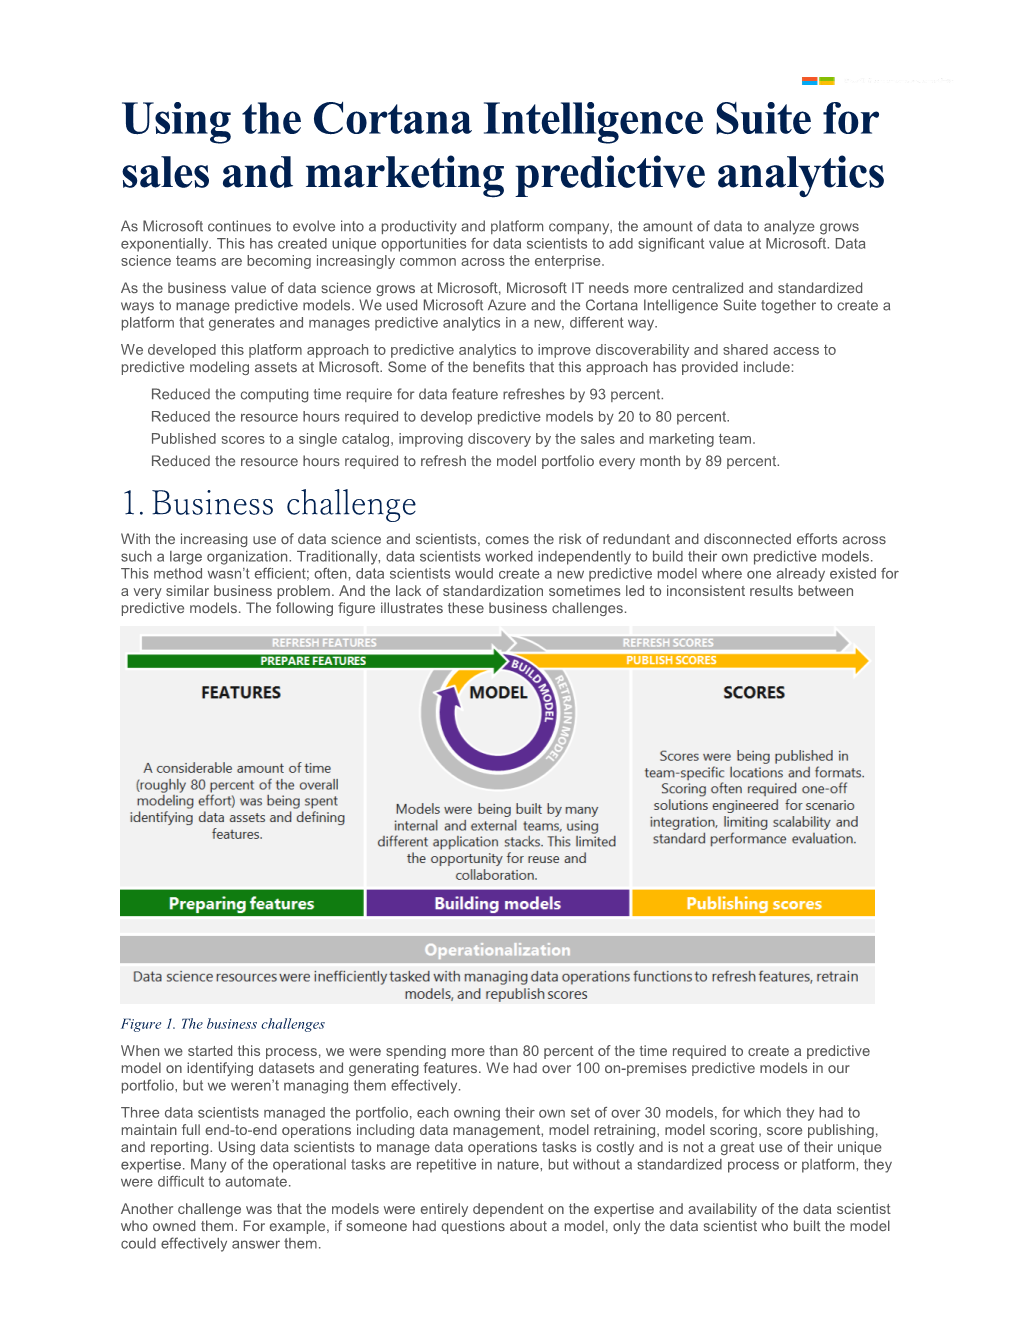 Using the Cortana Intelligence Suite for Sales and Marketing Predictive Analytics